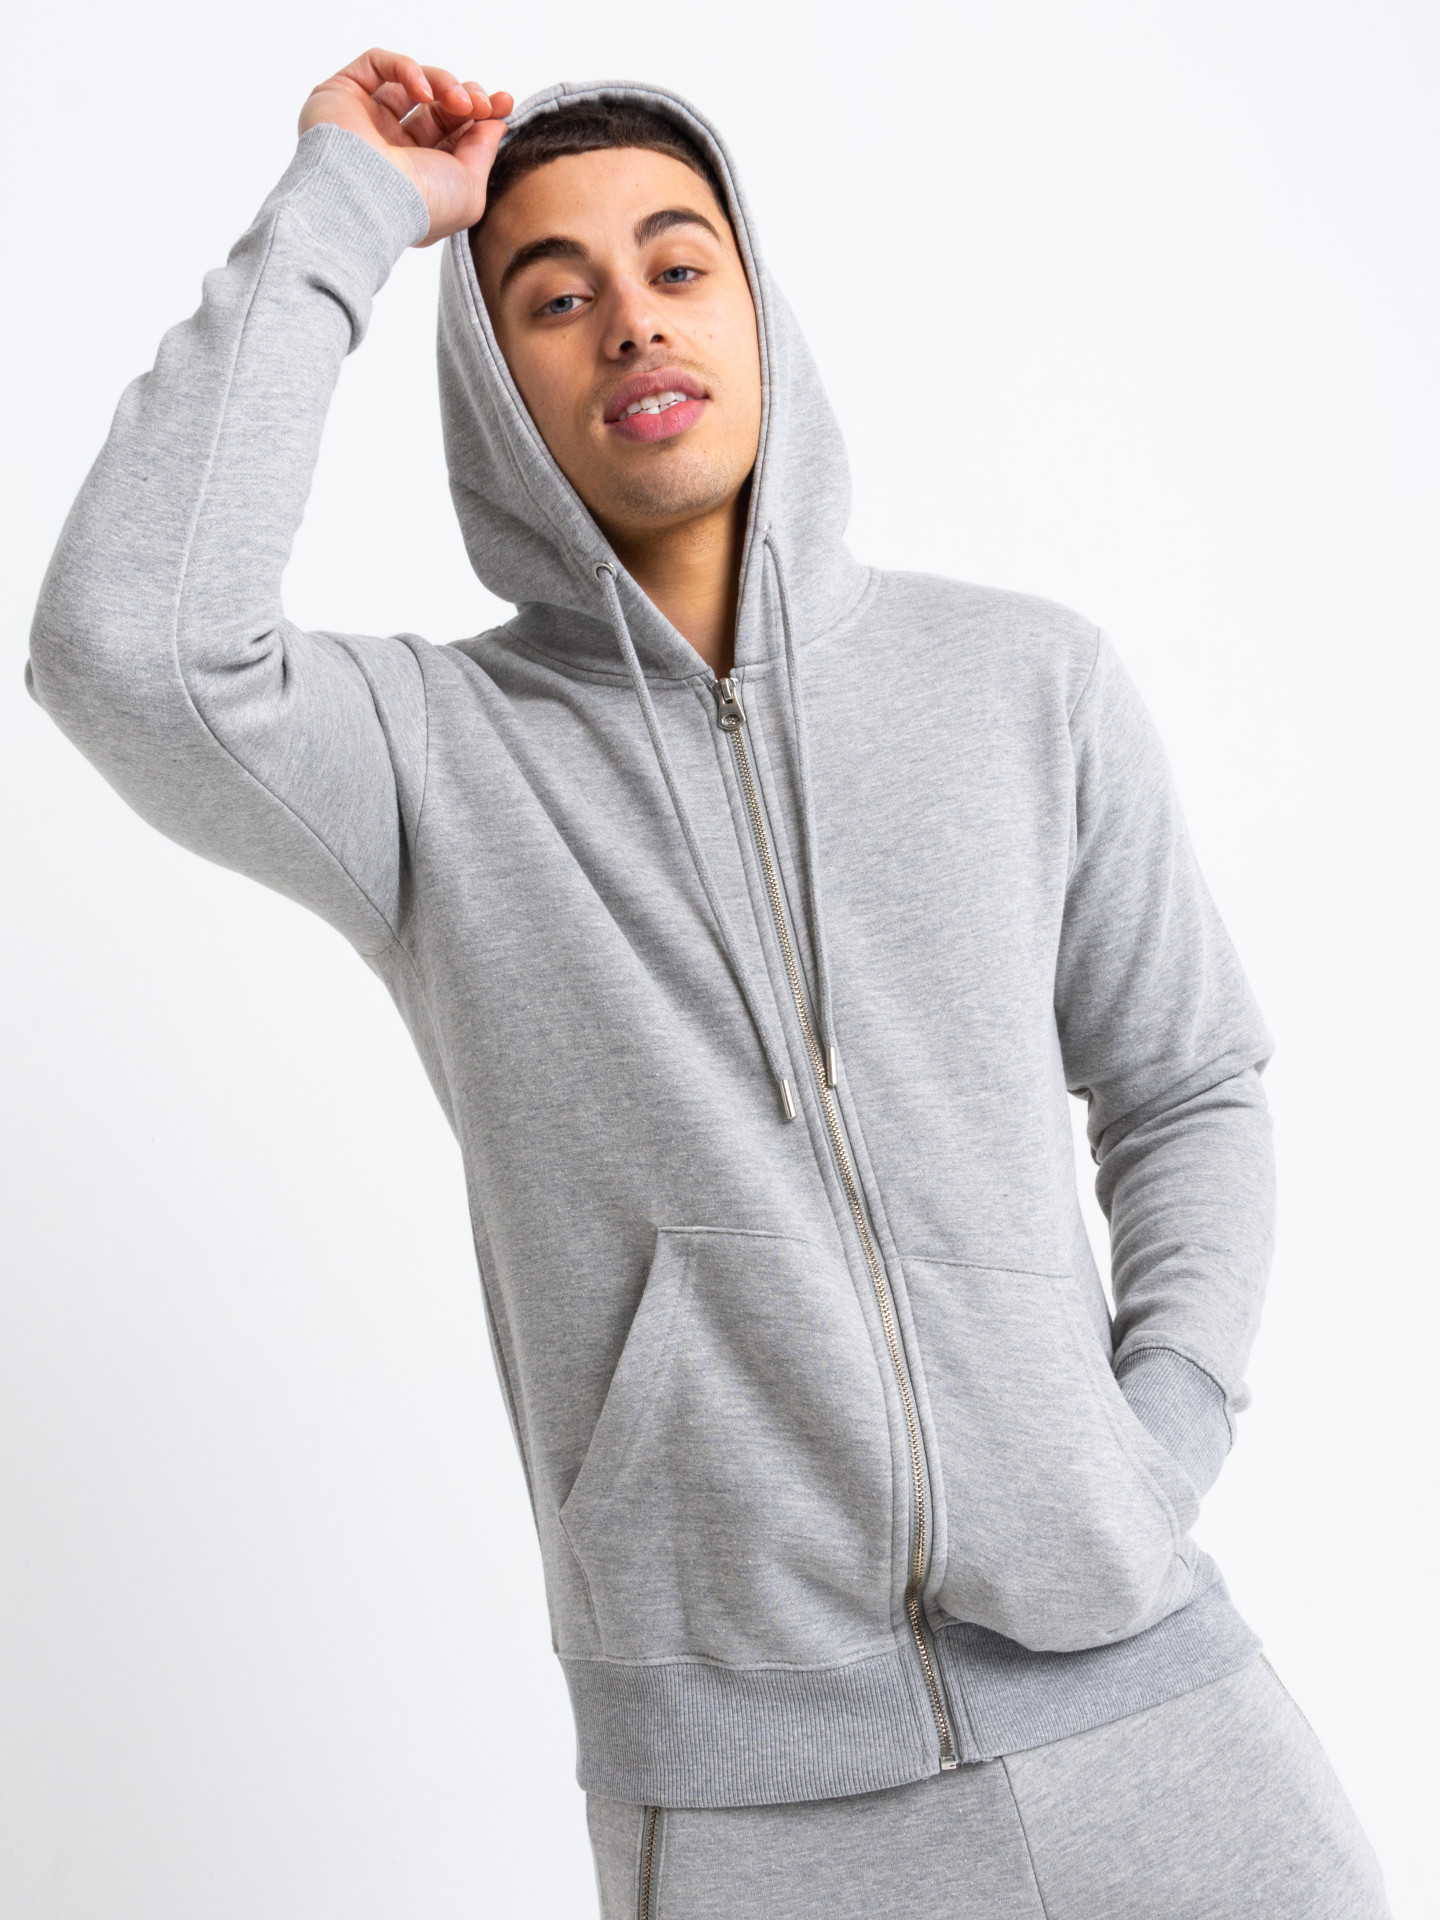 Silver Zip Tracksuit in Grey | Men's Clothing & Fashion | HisColumn